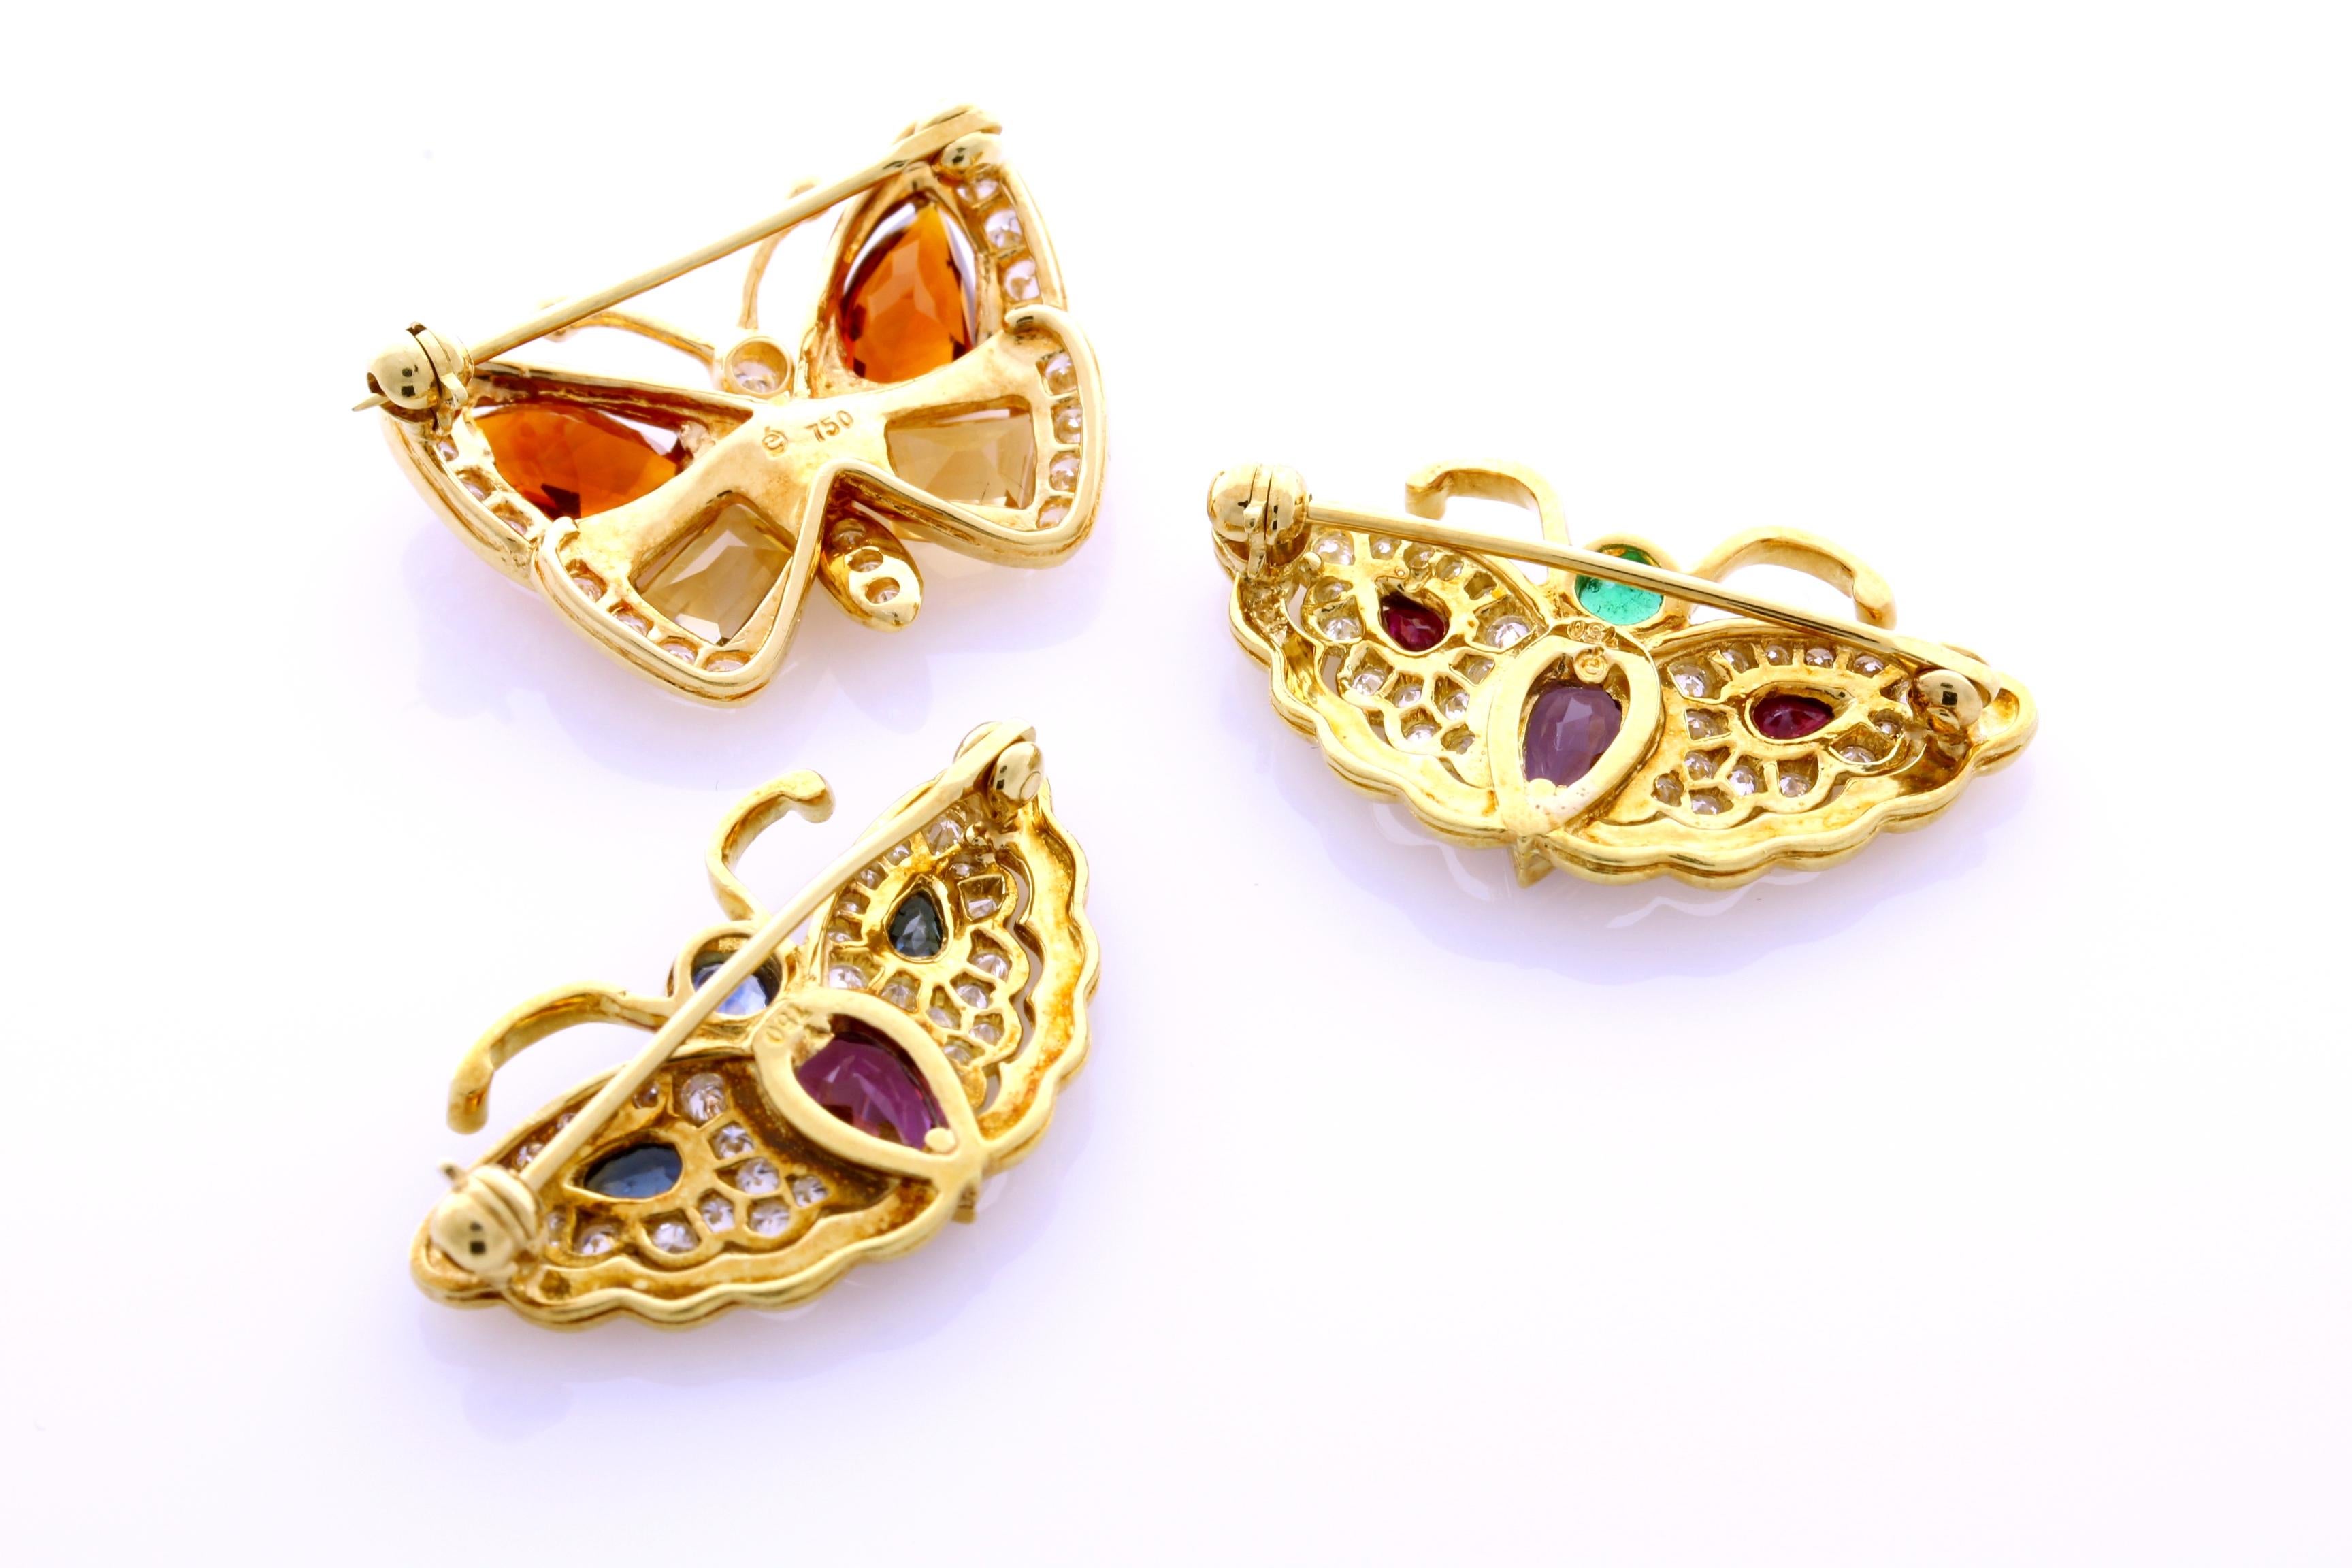 Incredible deal on set of 3, 18 Karat Yellow Gold, Genuine Colored Stone and Diamond Brooches.
This contemporary mounting is formed from 18 Karat Yellow Gold. 
This Genuine Colored Stones on this set are Garnet, Citrine, Amethyst, Sapphire, Ruby,